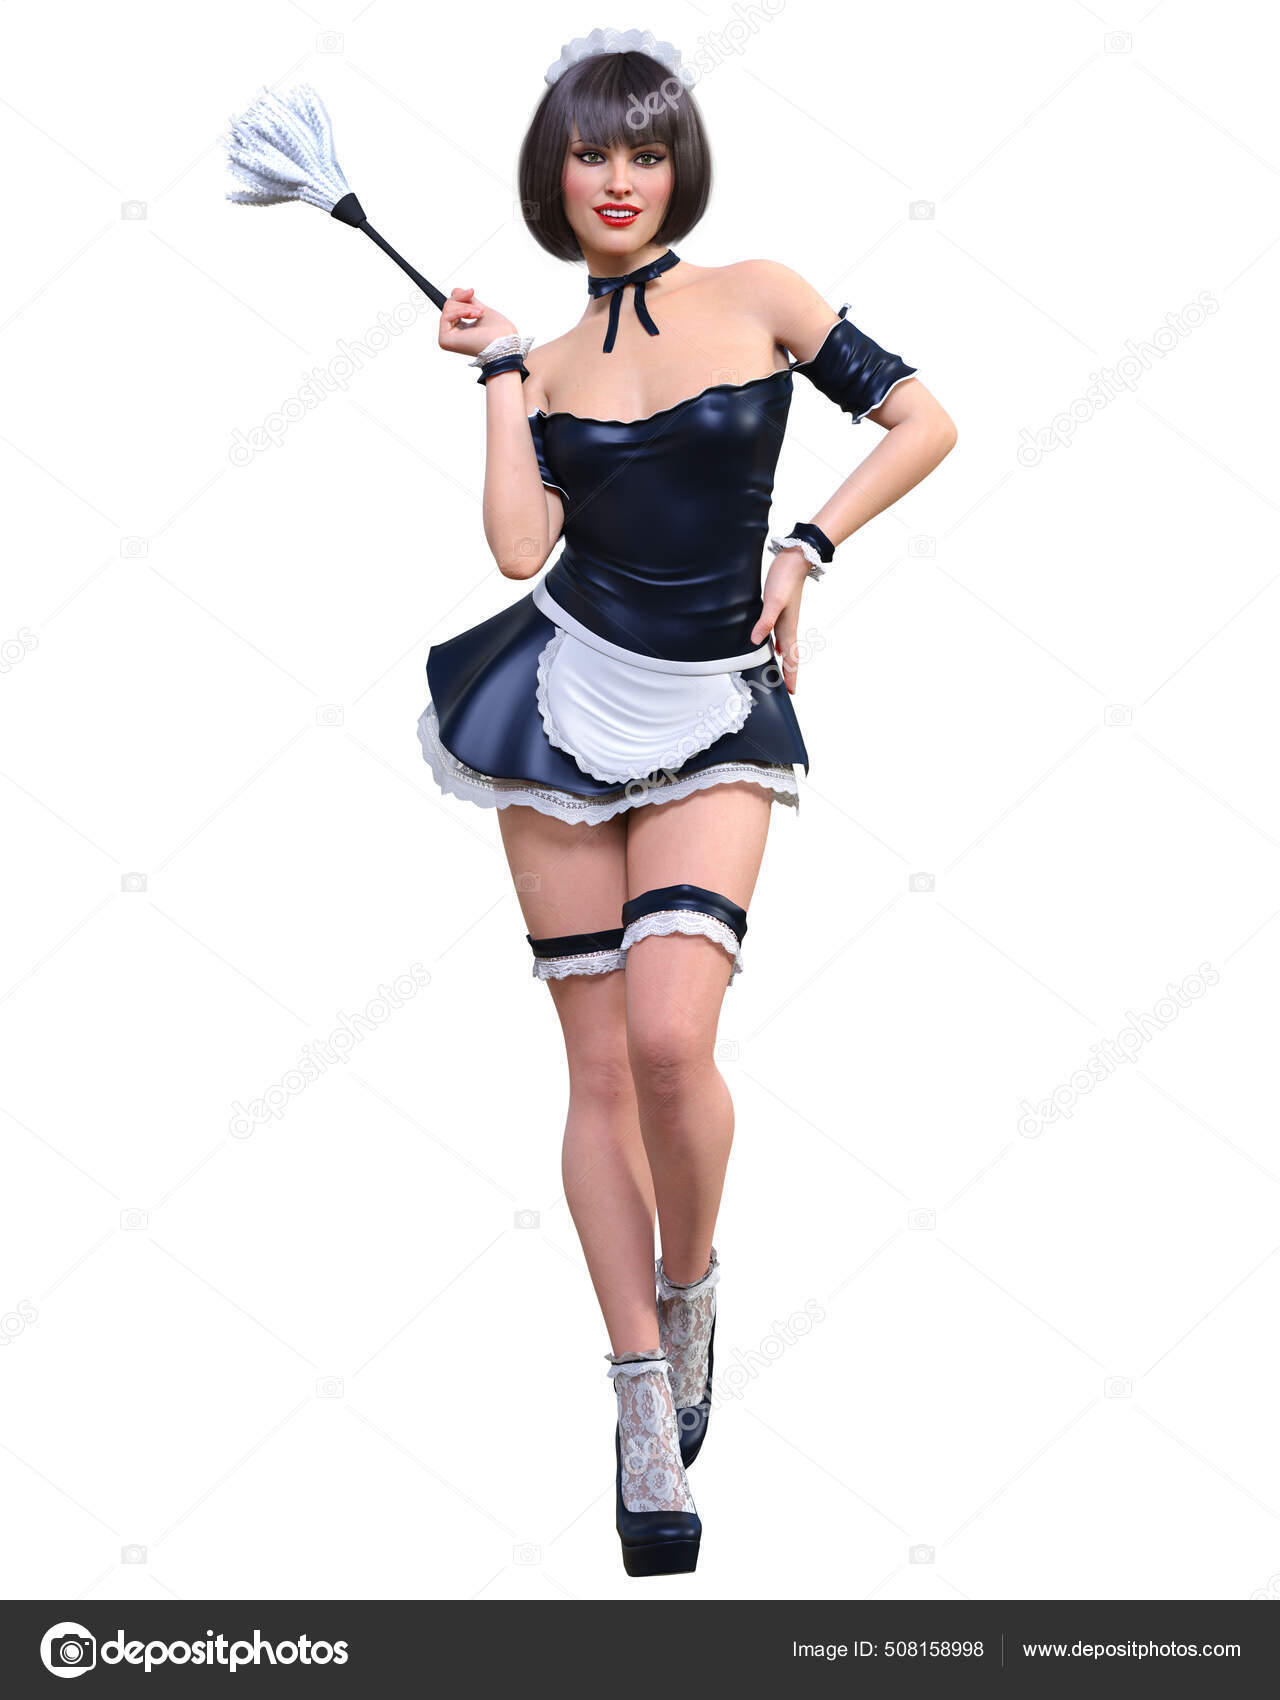 Real Sexy Maid